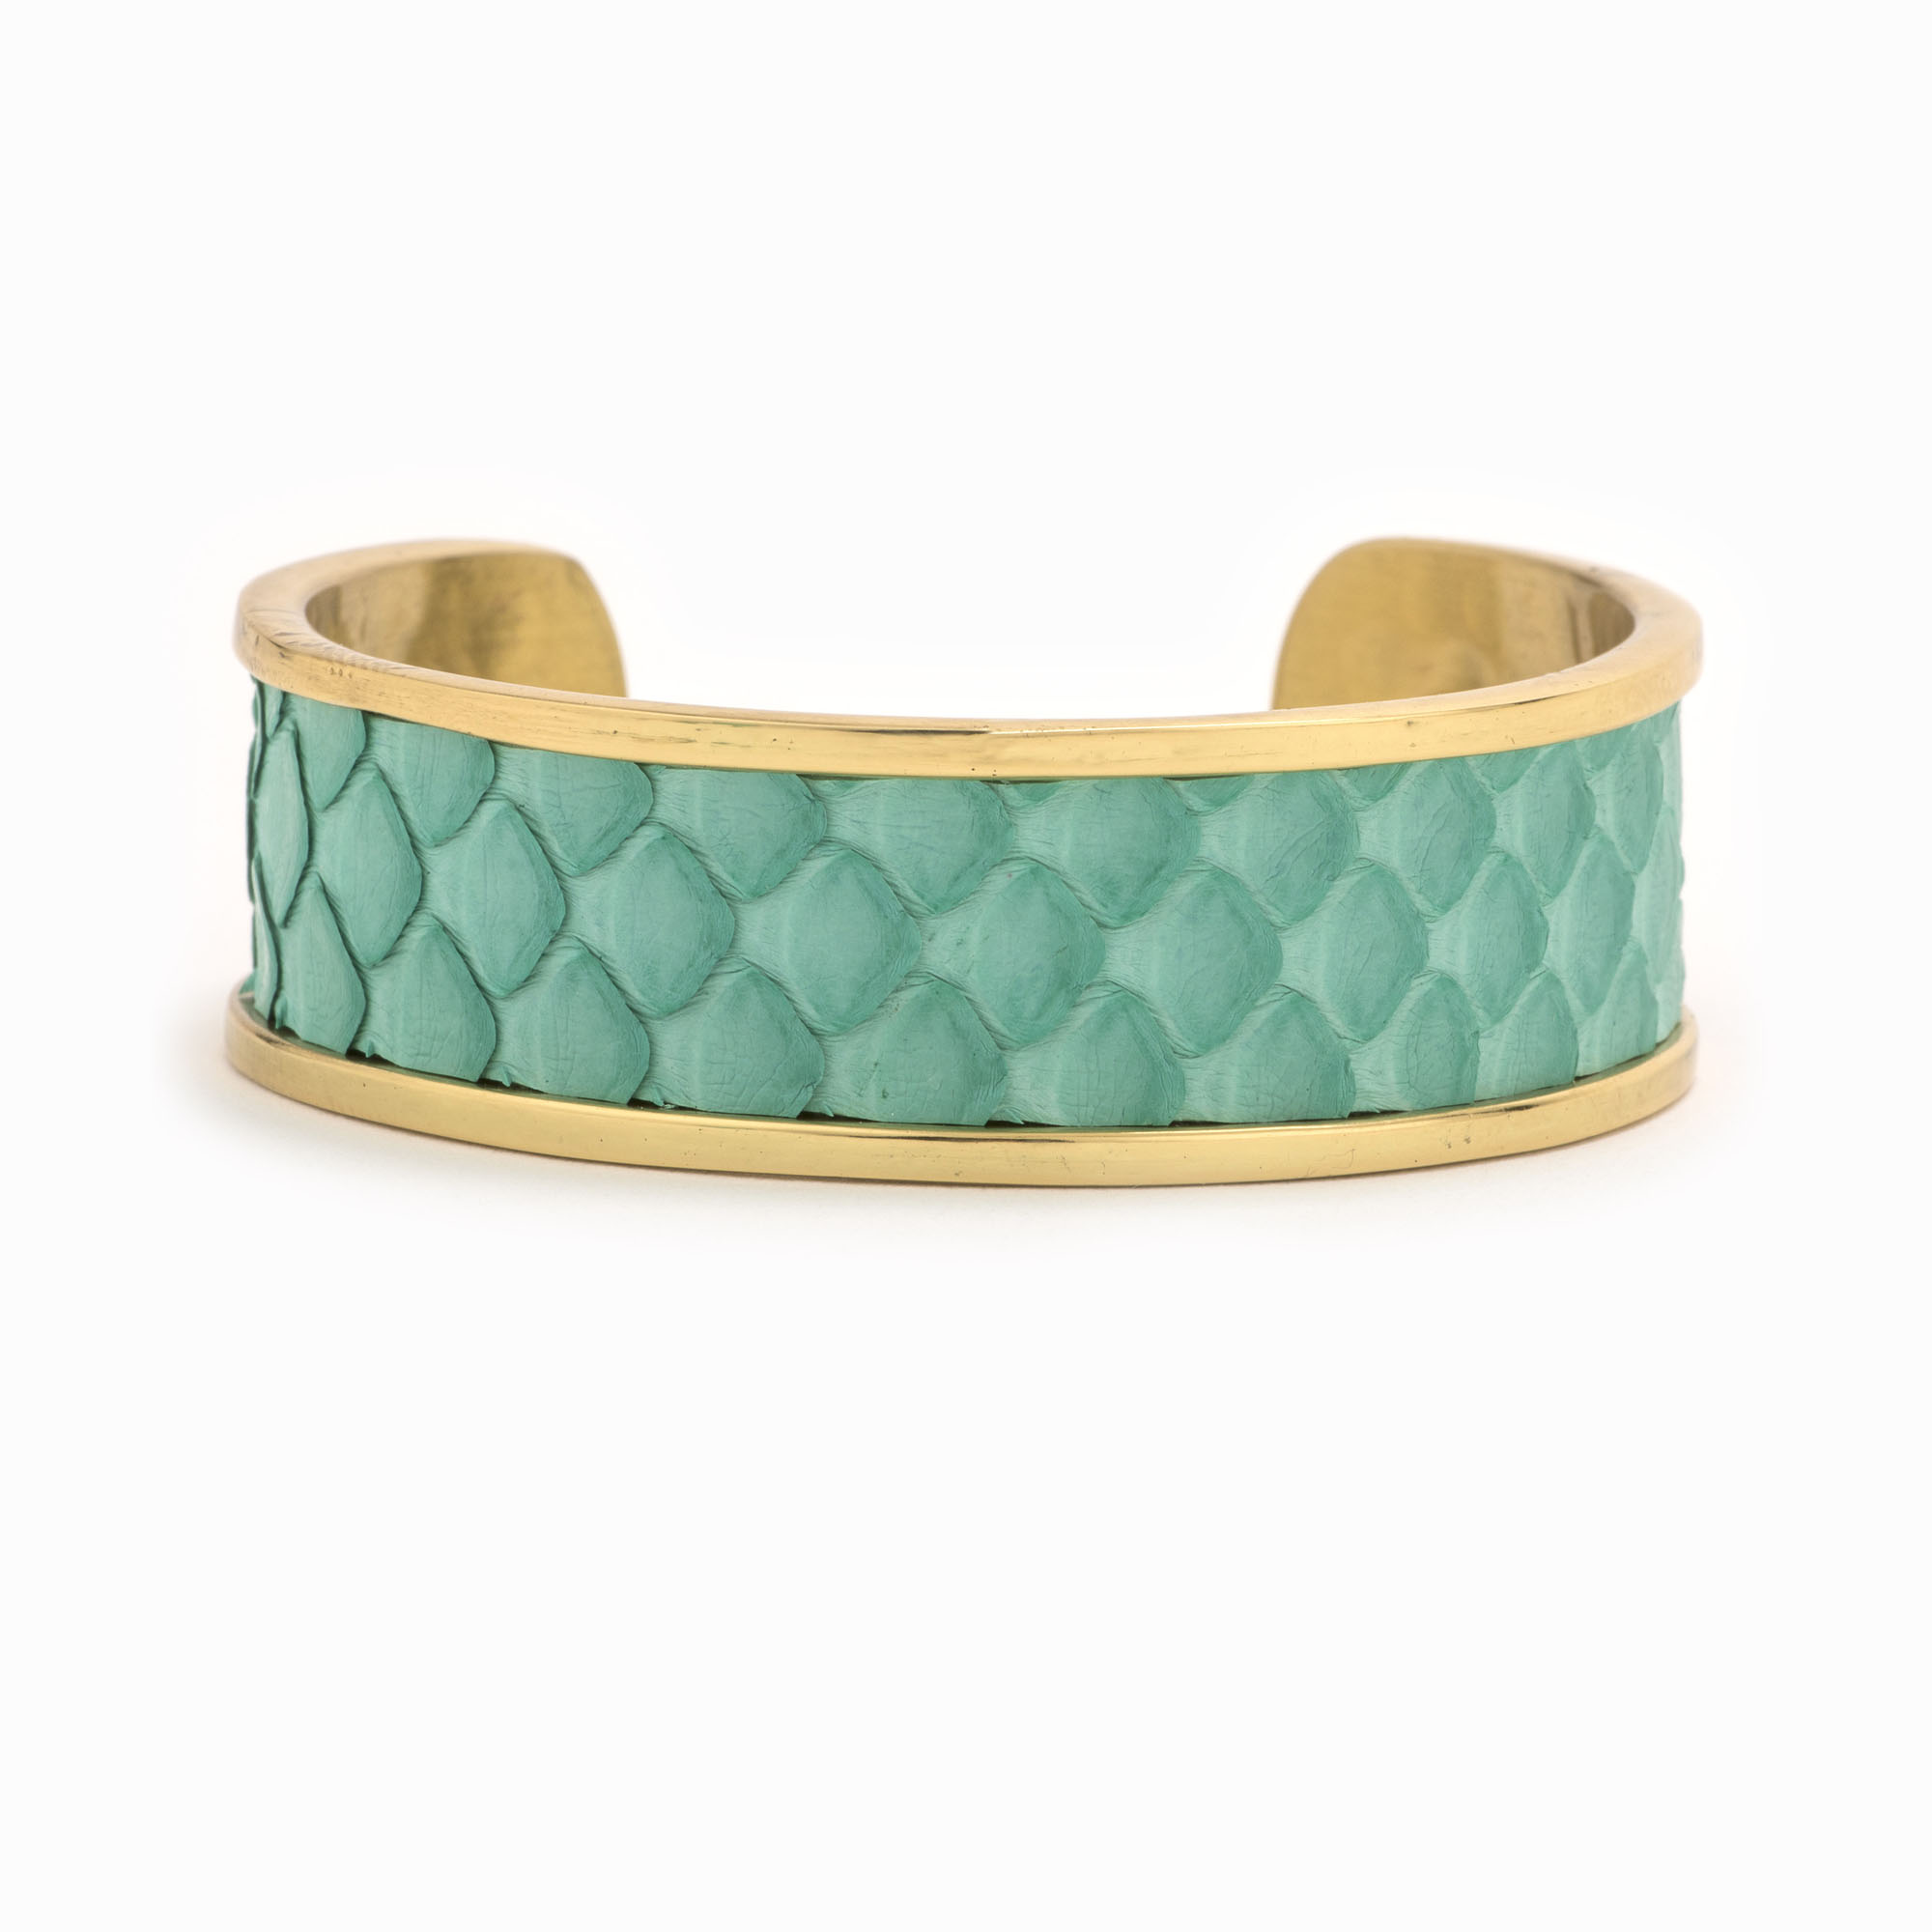 A medium gold cuff with turquoise colored snakeskin pattern inlaid.